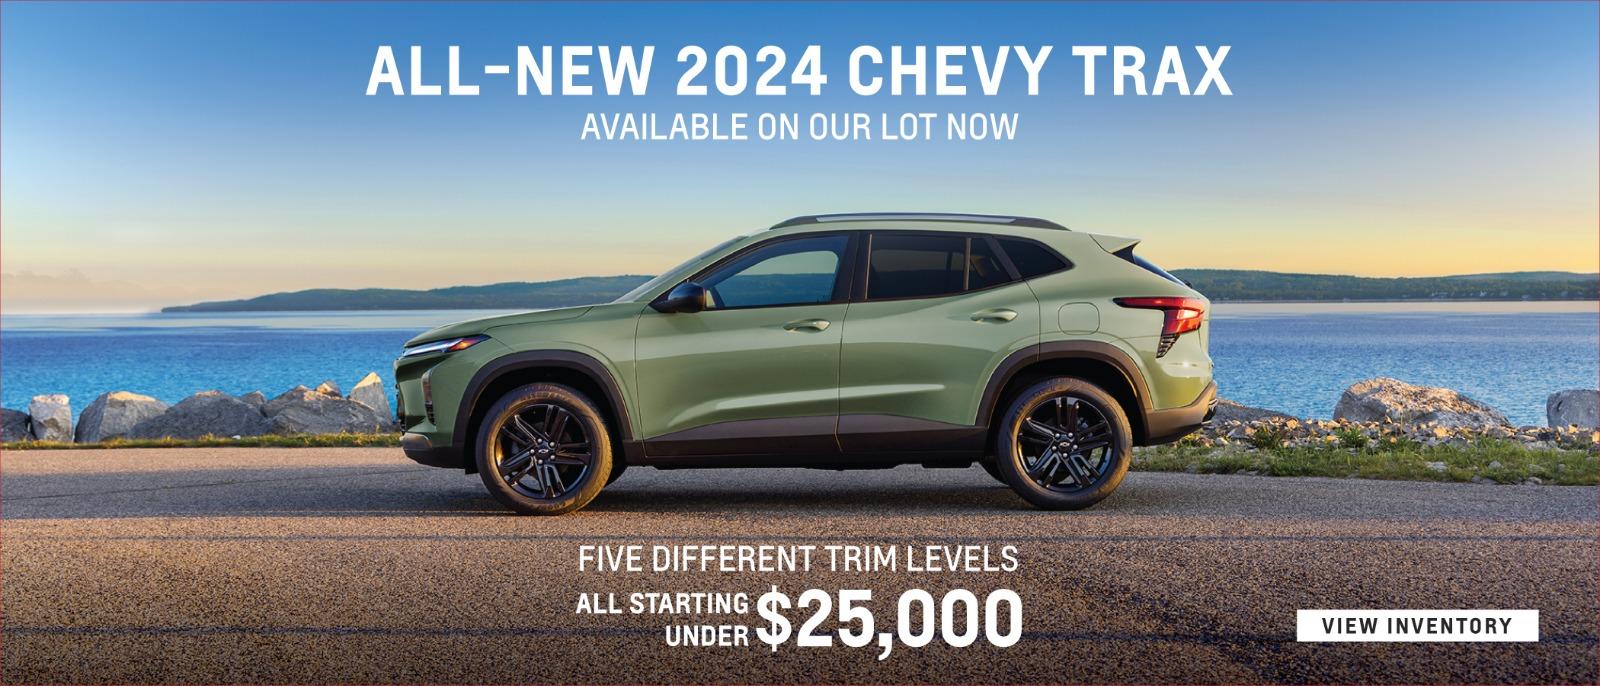 All New 2024 Chevy Trax Available on our lot now